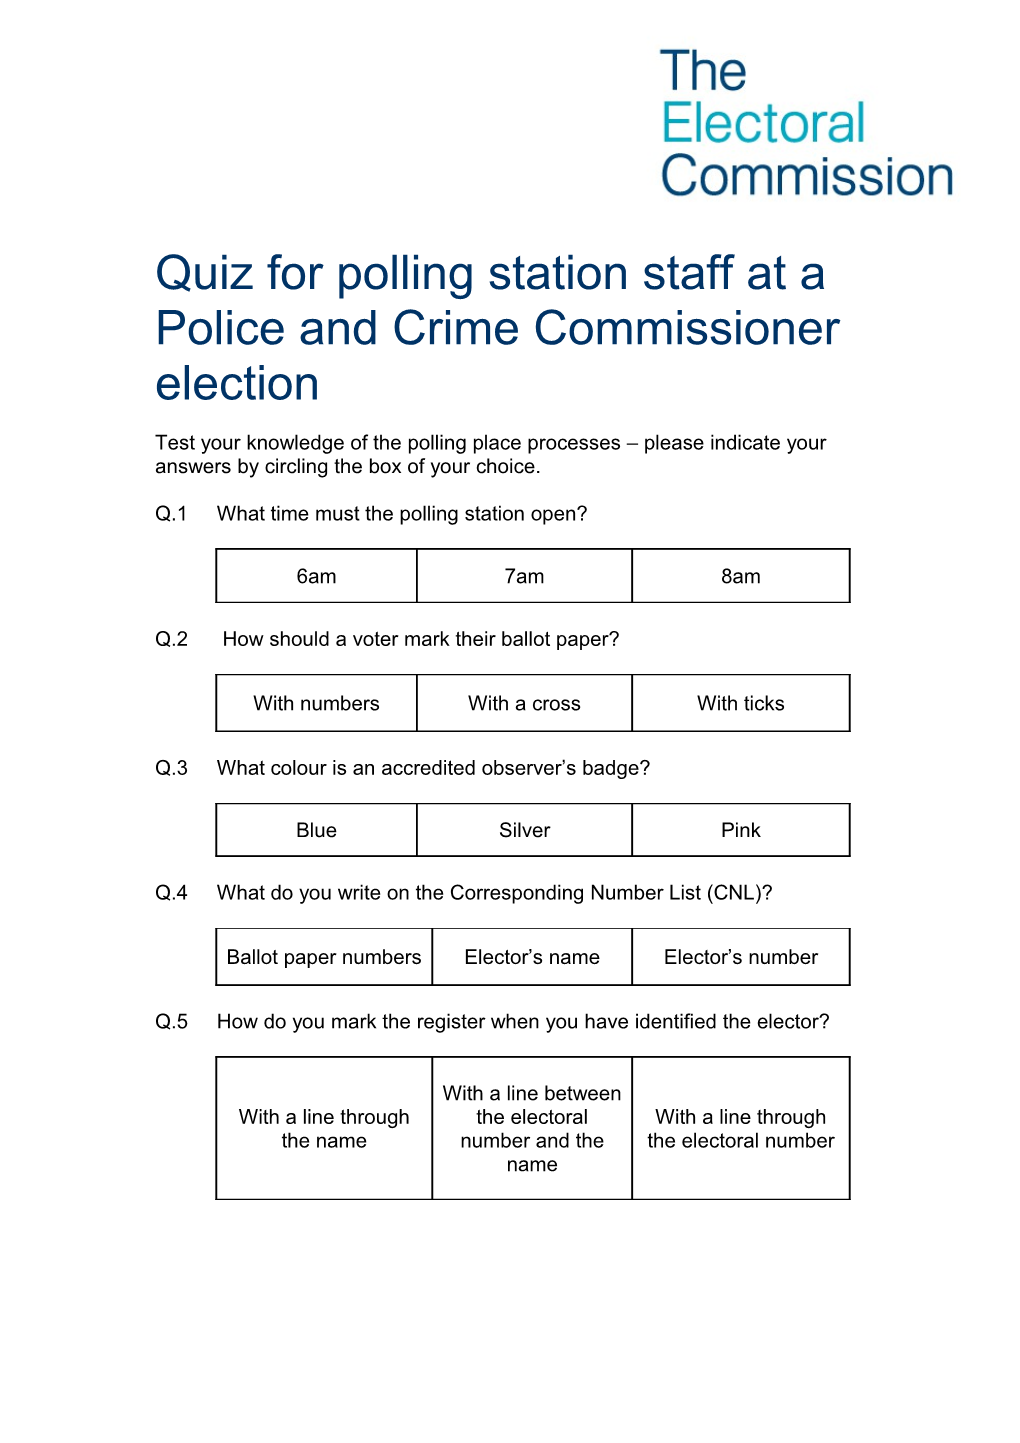 PCC Quiz for Polling Station Staff